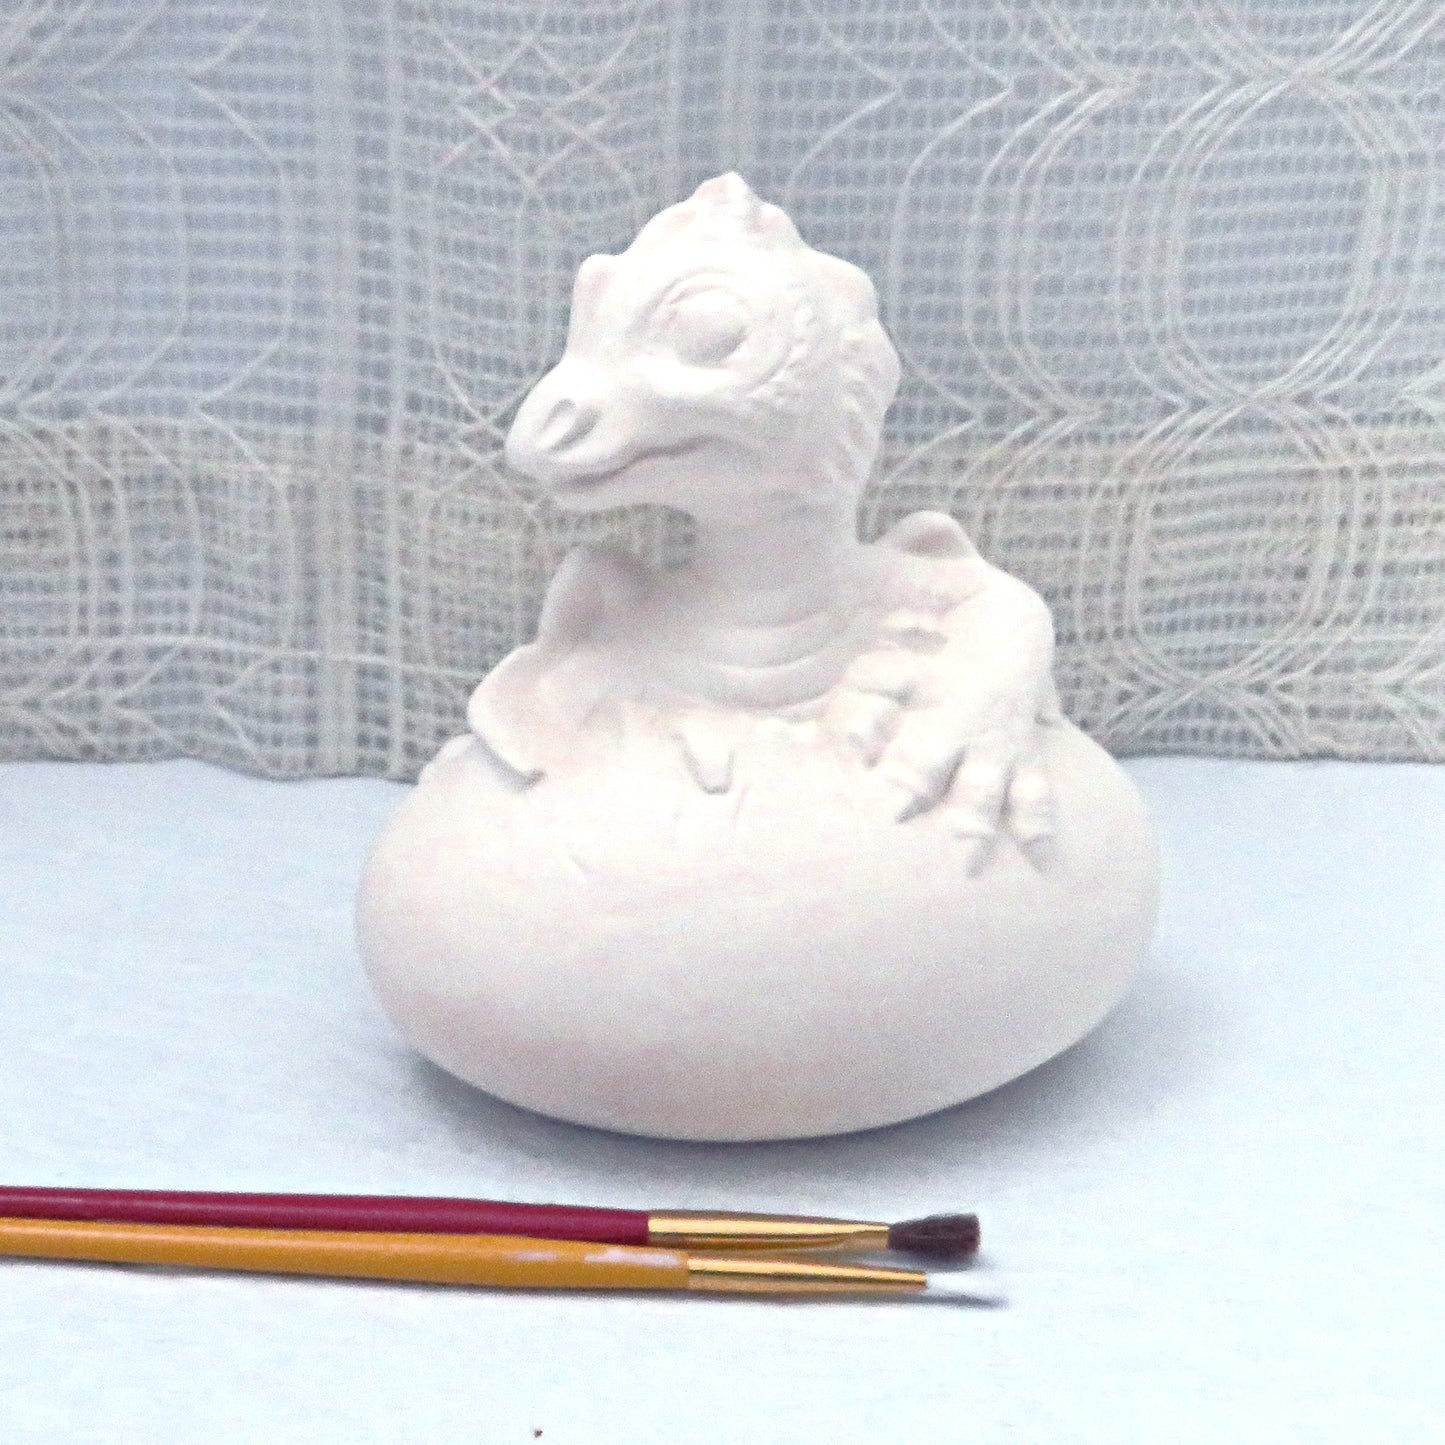 Ready to paint ceramic dragon figurine on a pale blue table with a lacy curtain behind it.  There are 2 paint brushes sitting in front of this dragon statue.